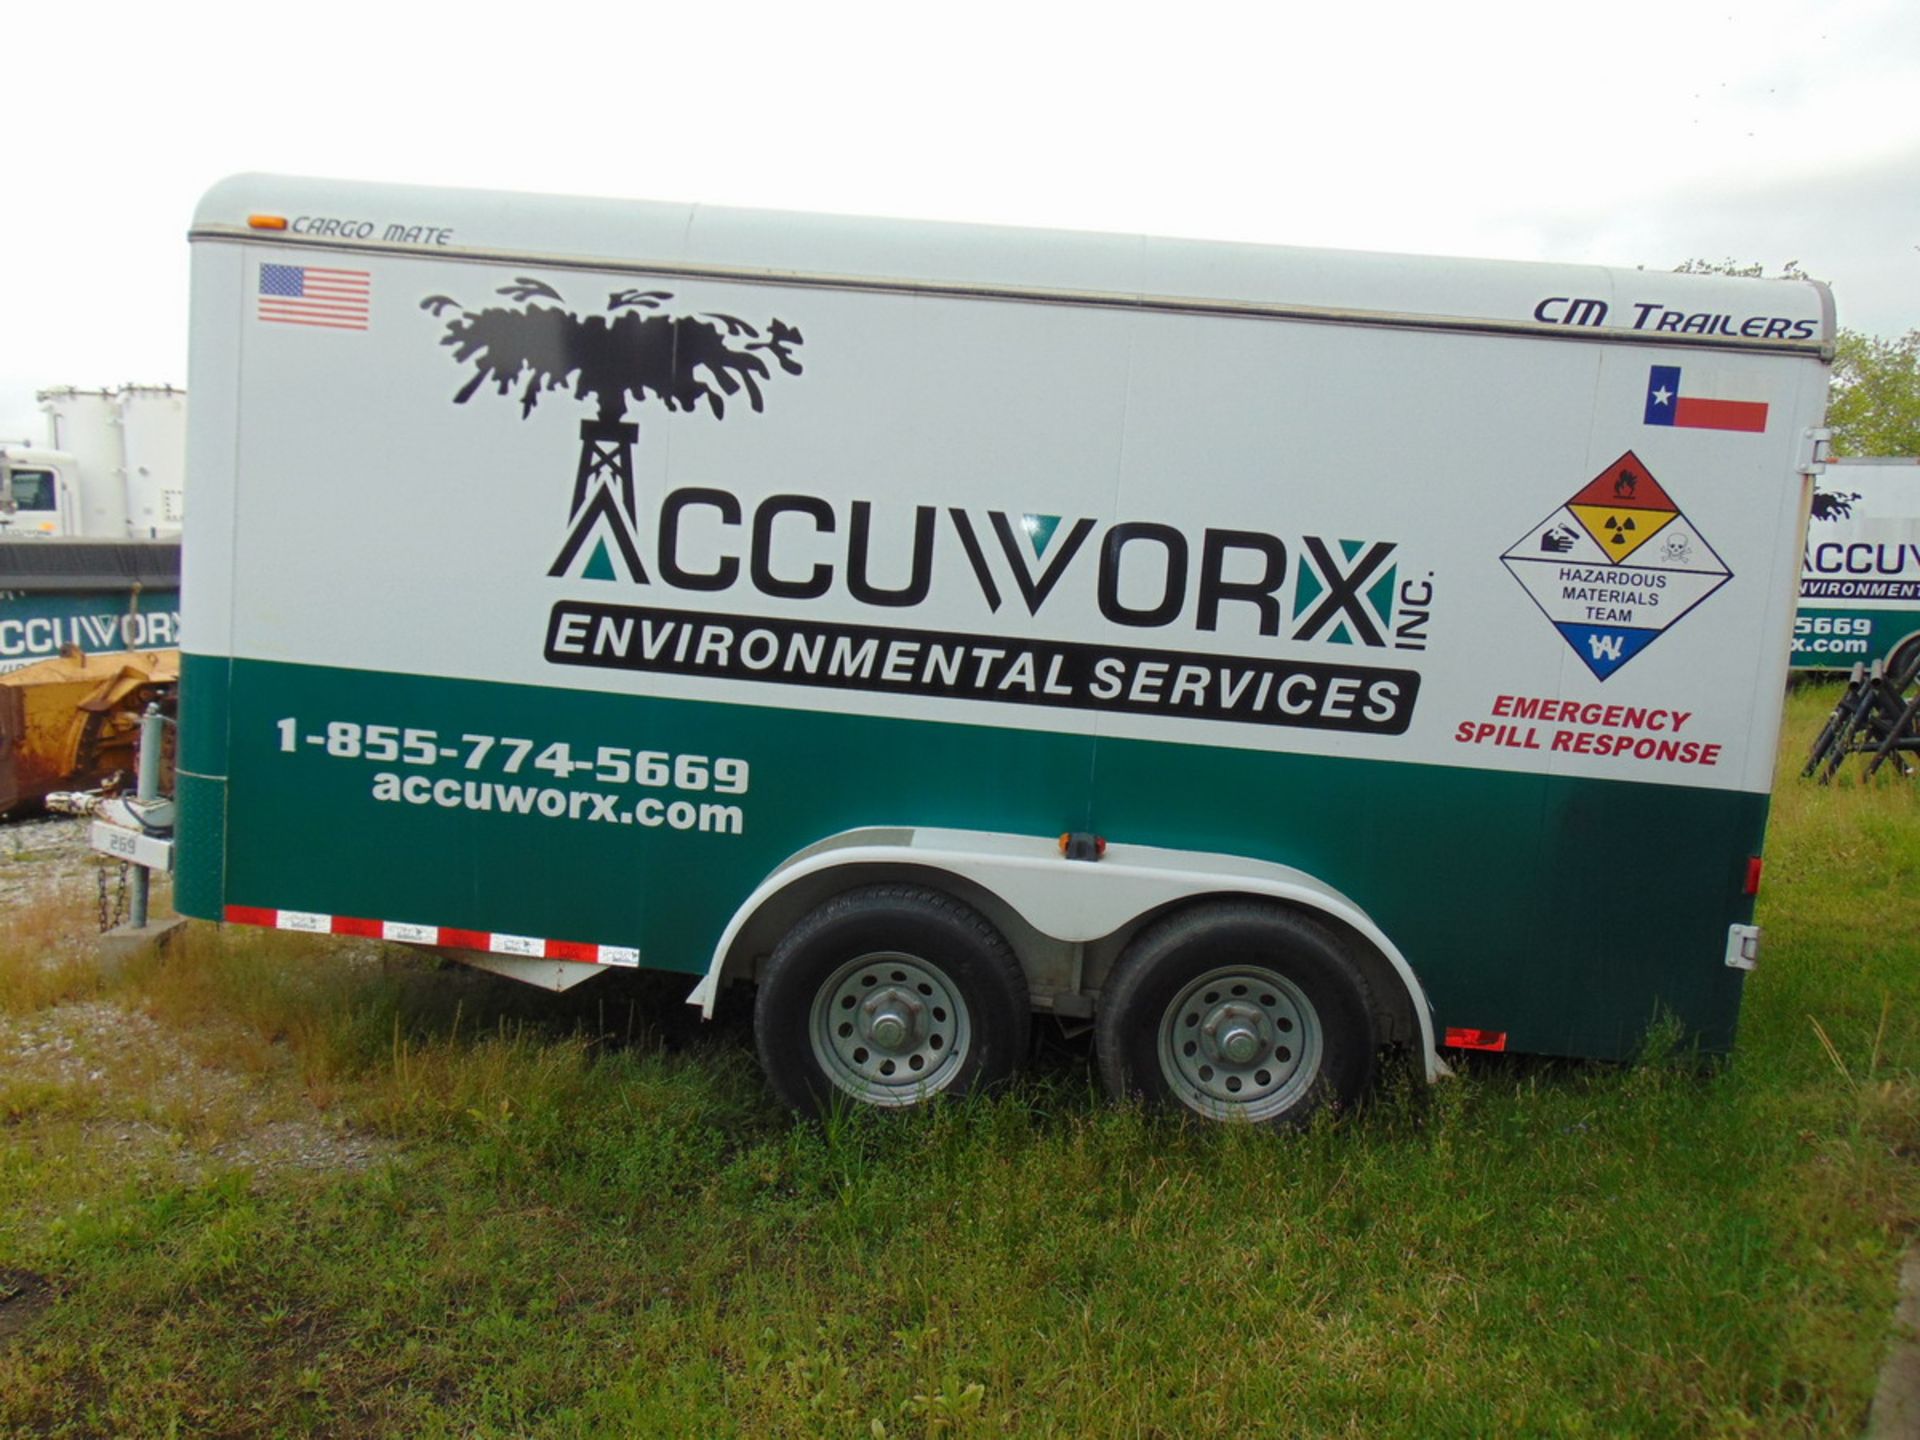 2012 CM Trailers CMC5240 Cargo Mate T/A Enclosed Cargo Trailer, Side Door Access, 13'6"L, Vin: - Image 3 of 7